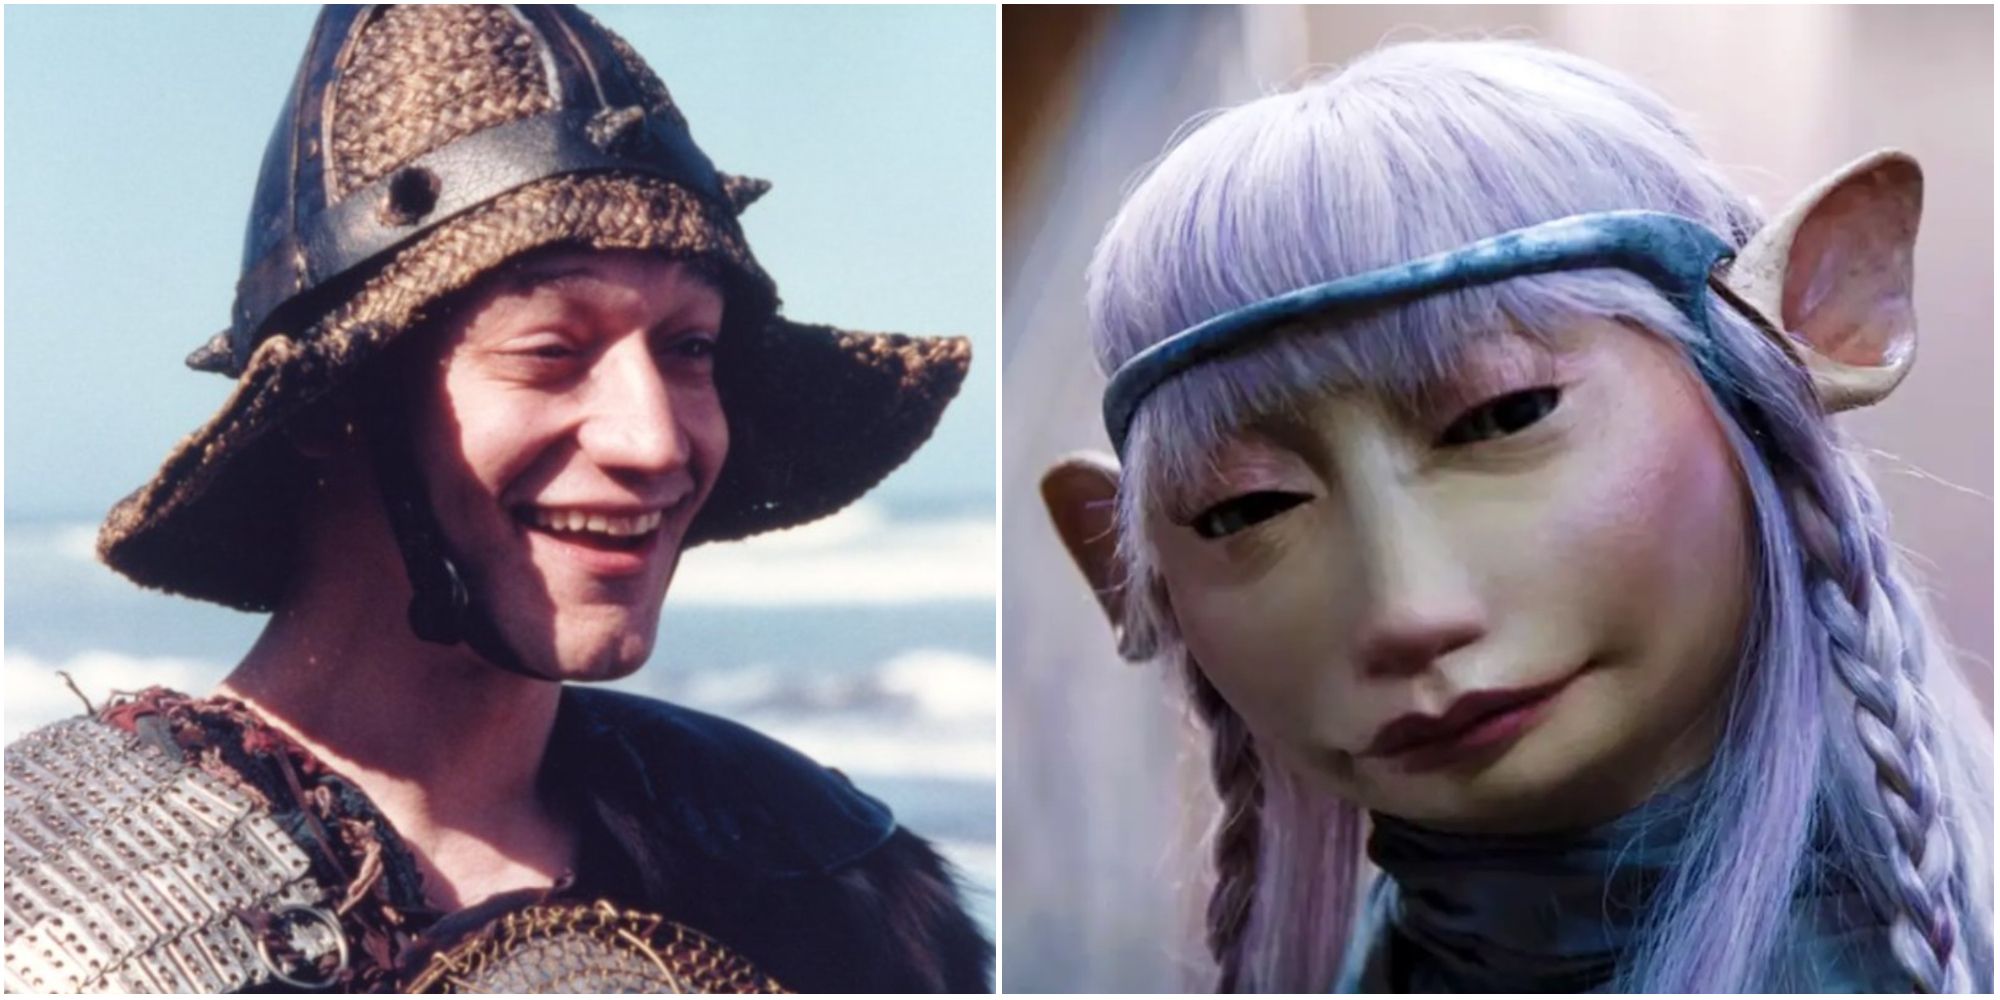 Joxer in Xena and Seladon in The Dark Crystal